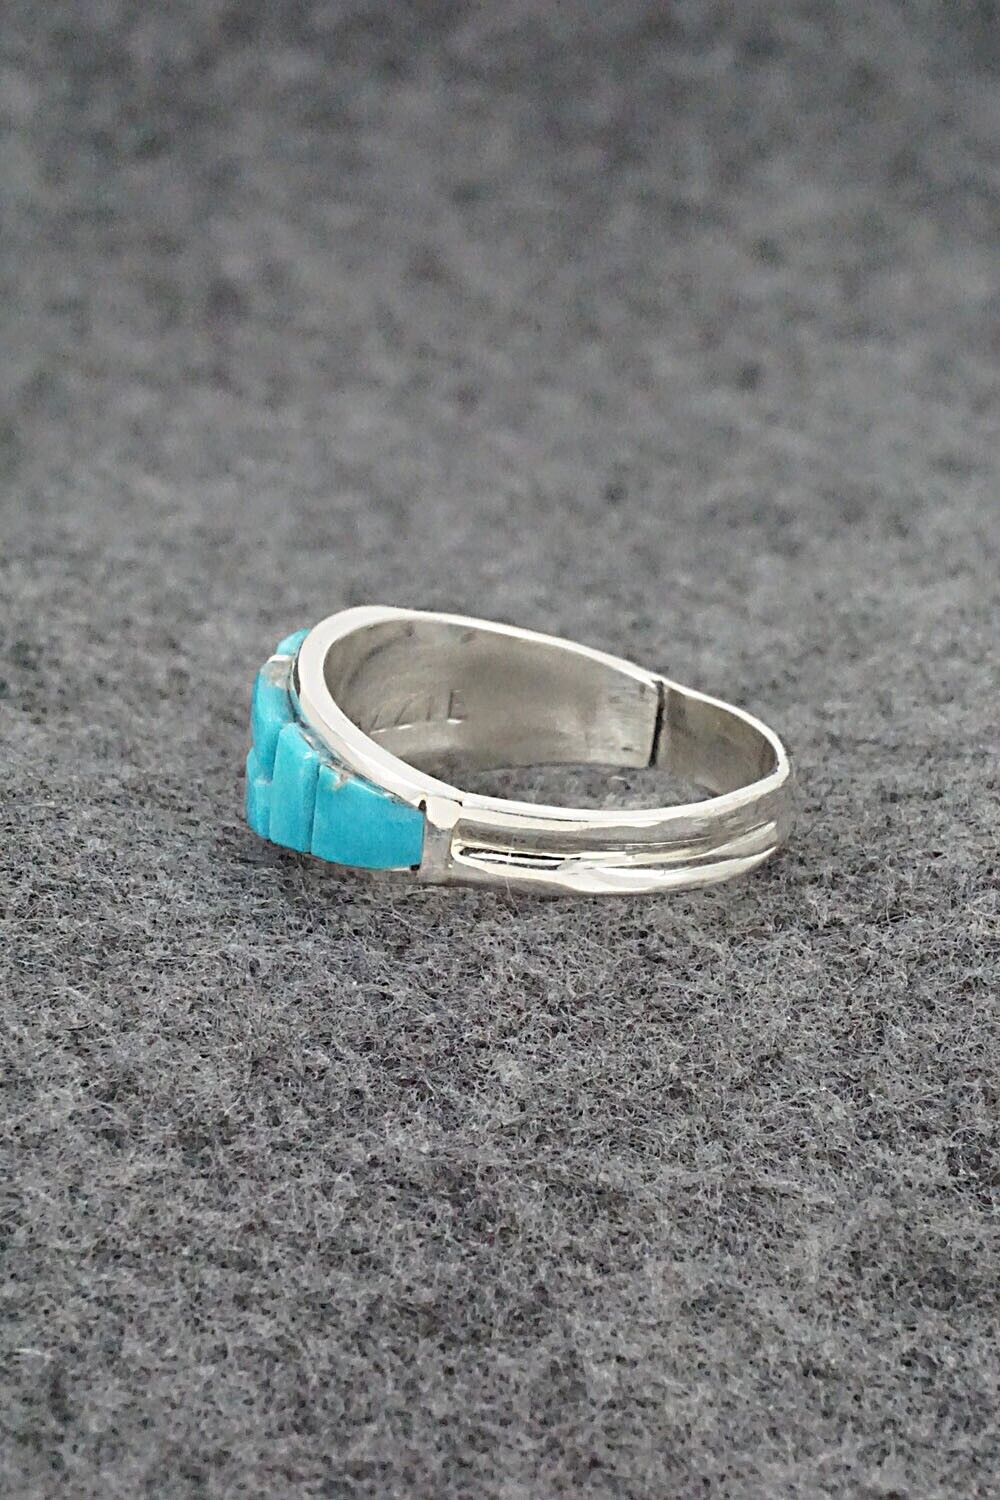 Turquoise & Sterling Silver Ring - Edison Yazzie - Size 12.75